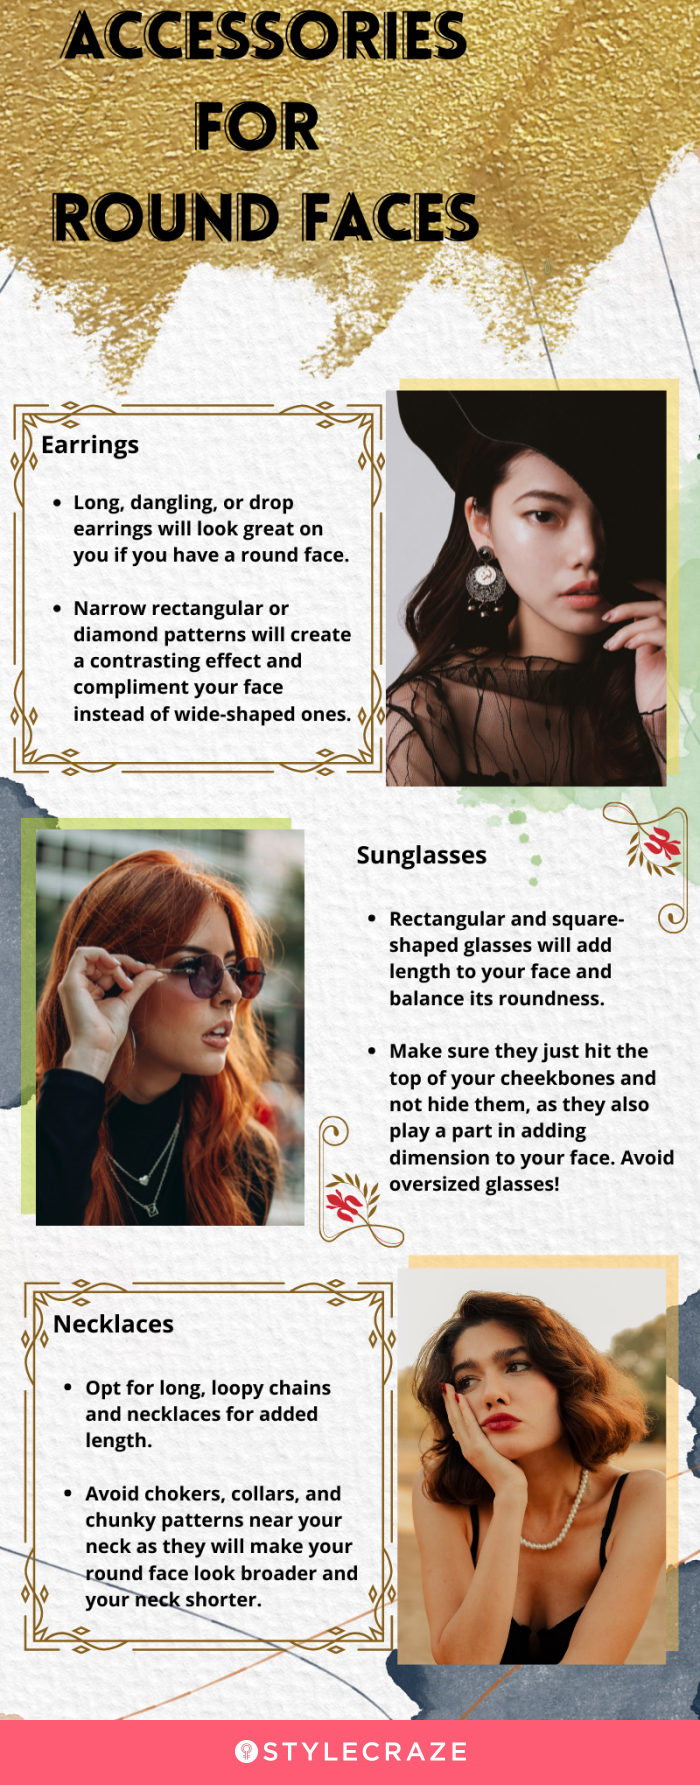 accessories for round faces [infographic]